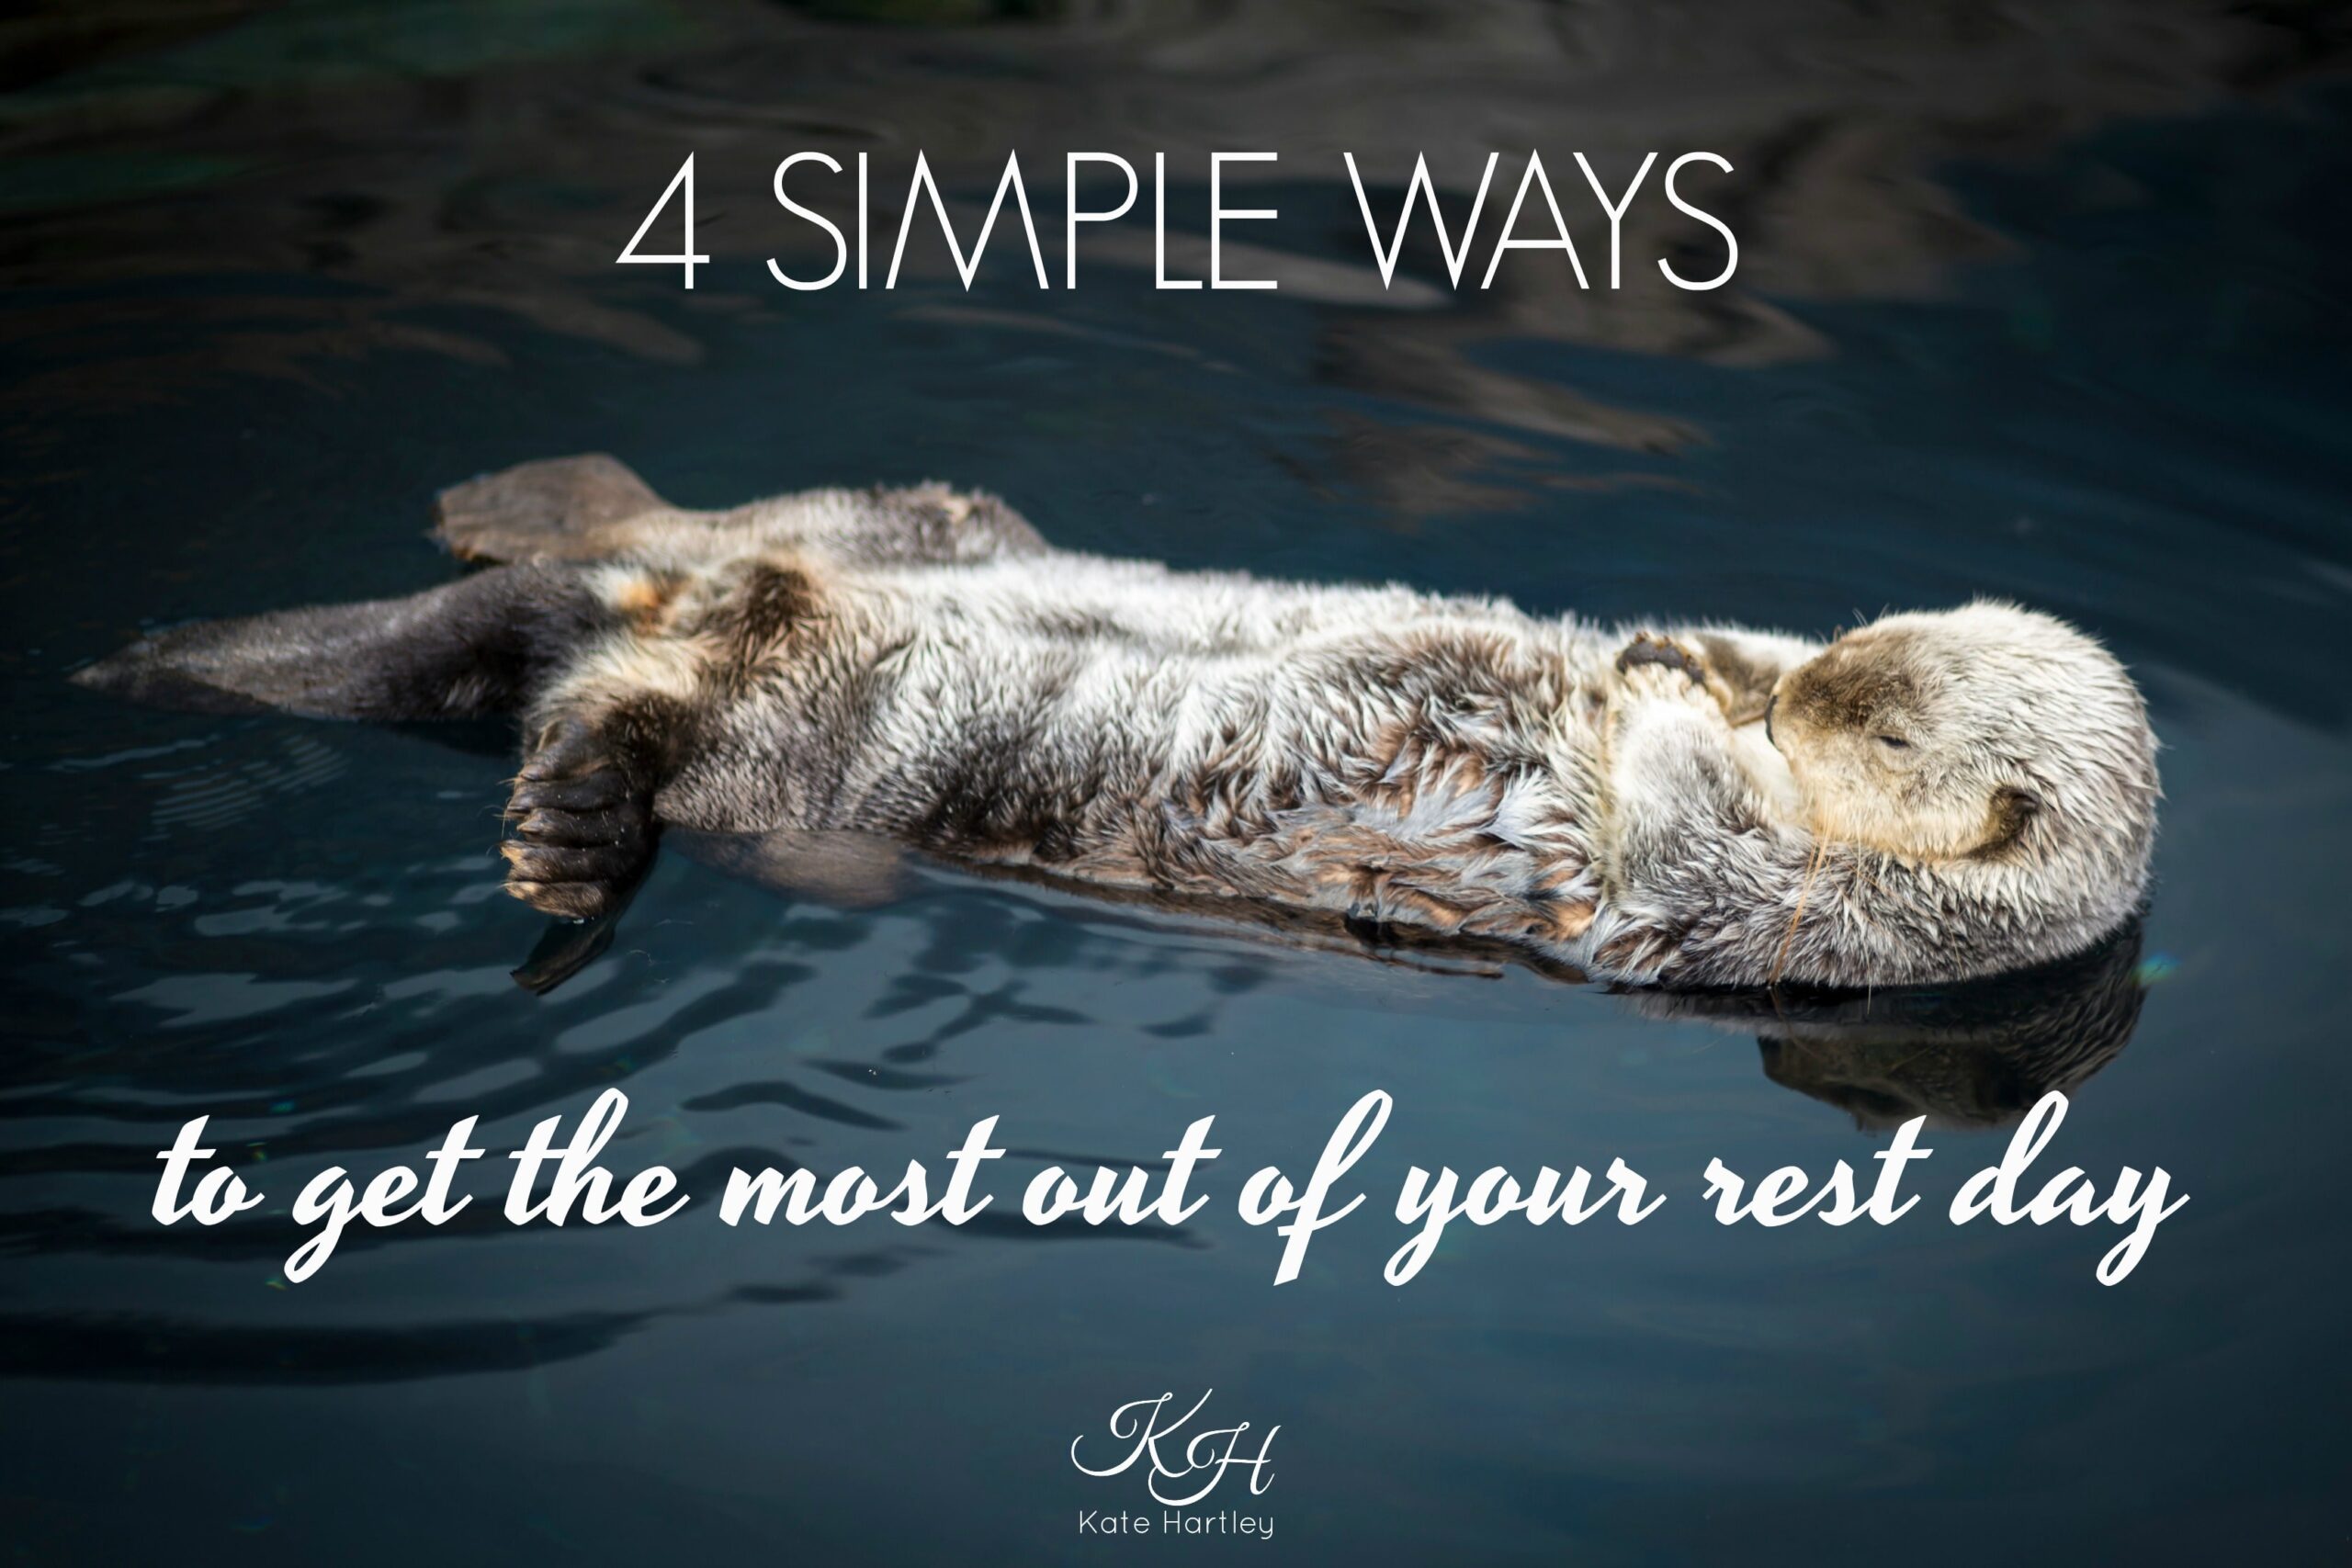 4 simple ways to get the most out of your rest day, rest day, relaxation